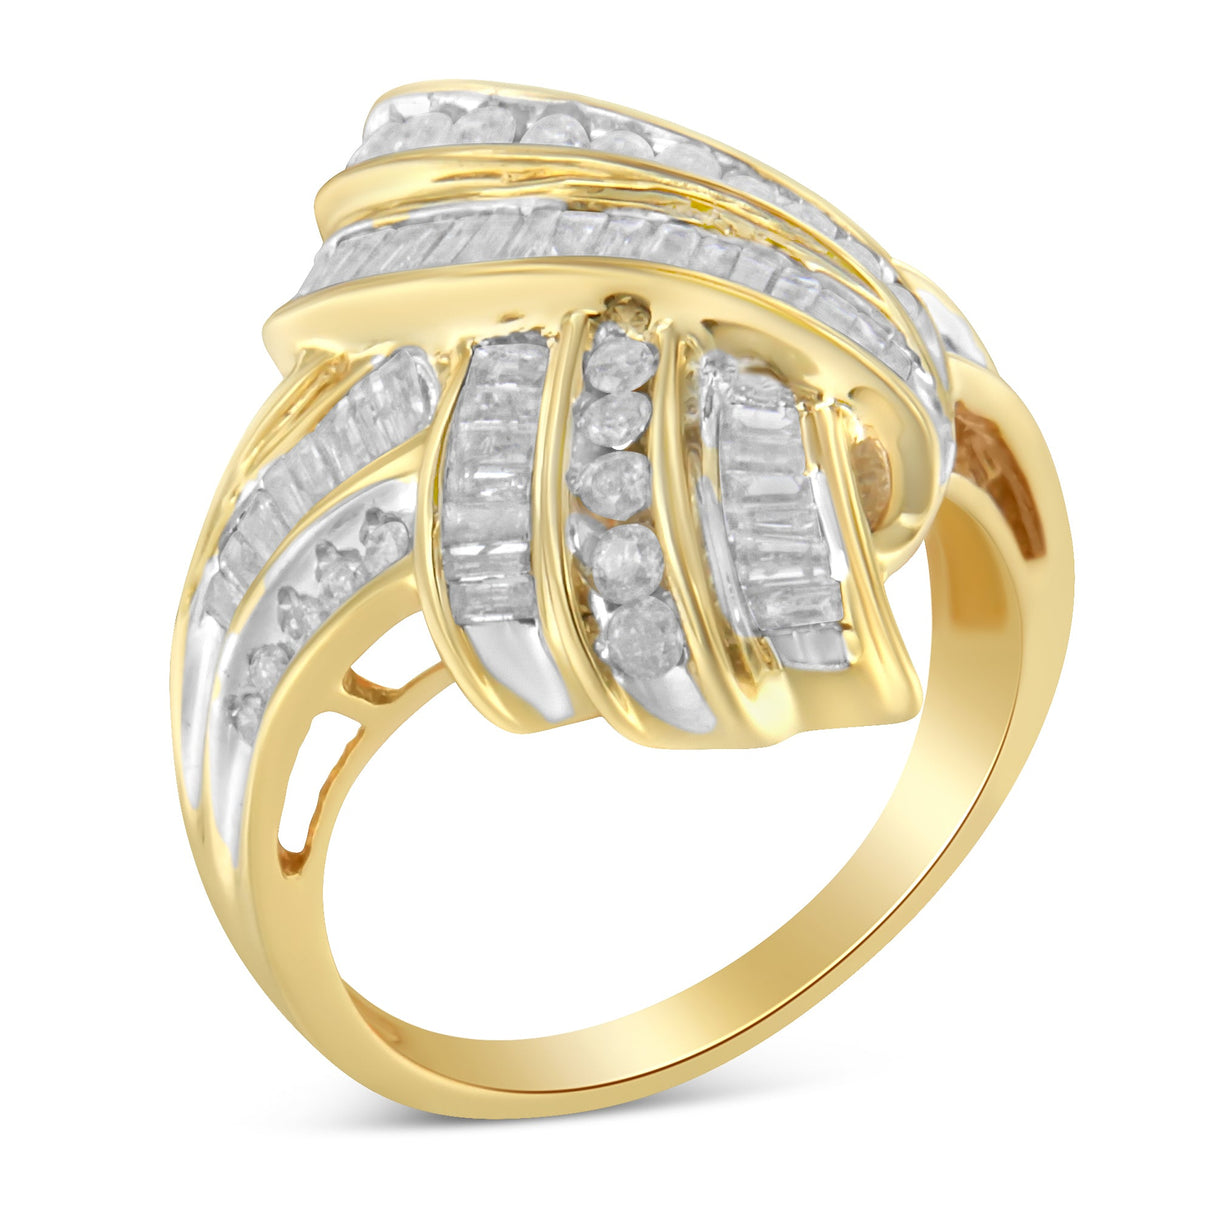 10K Yellow Gold Plated .925 Sterling Silver 1.0 Cttw Round & Baguette Diamond Knot Channel Statement Ring (I-J Color, I2-I3 Clarity) - Size 6-1/2 - Tuesday Morning-Rings